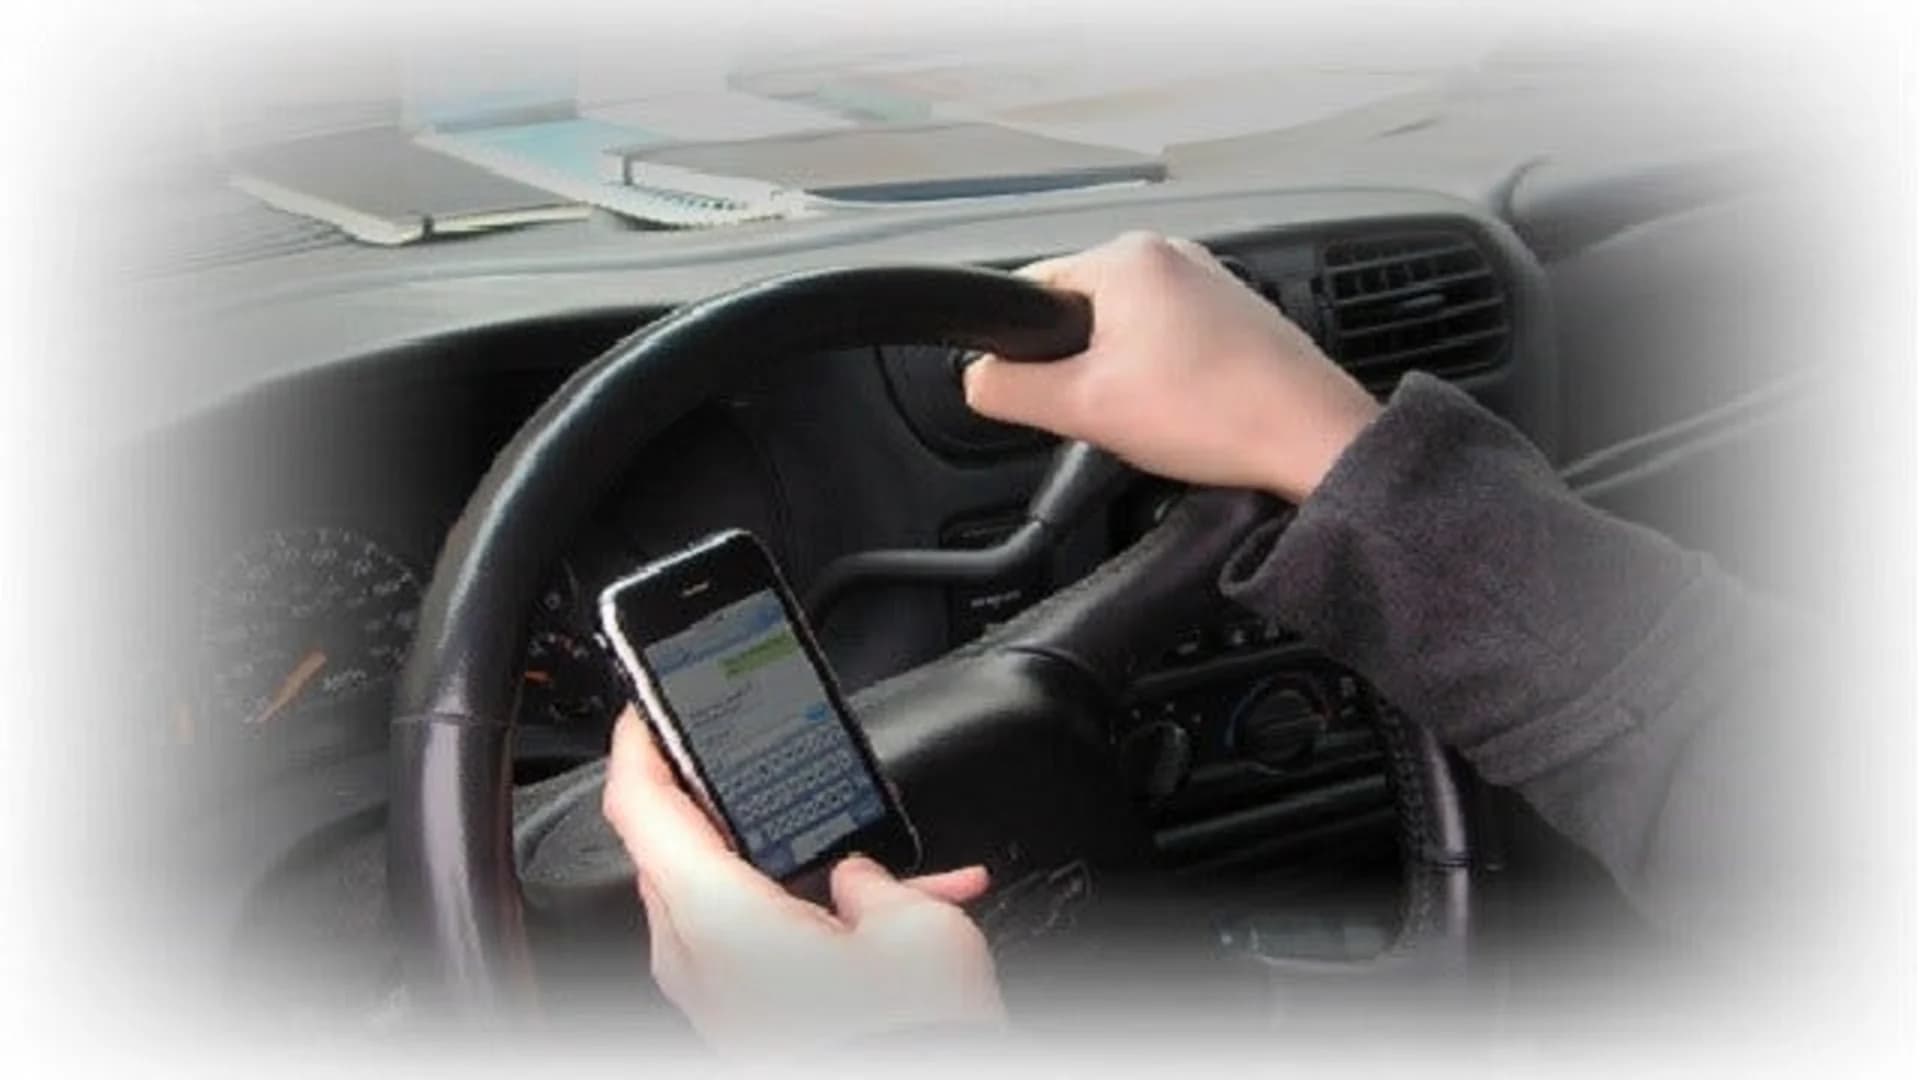 More than 600 in New Jersey warned about distracted driving